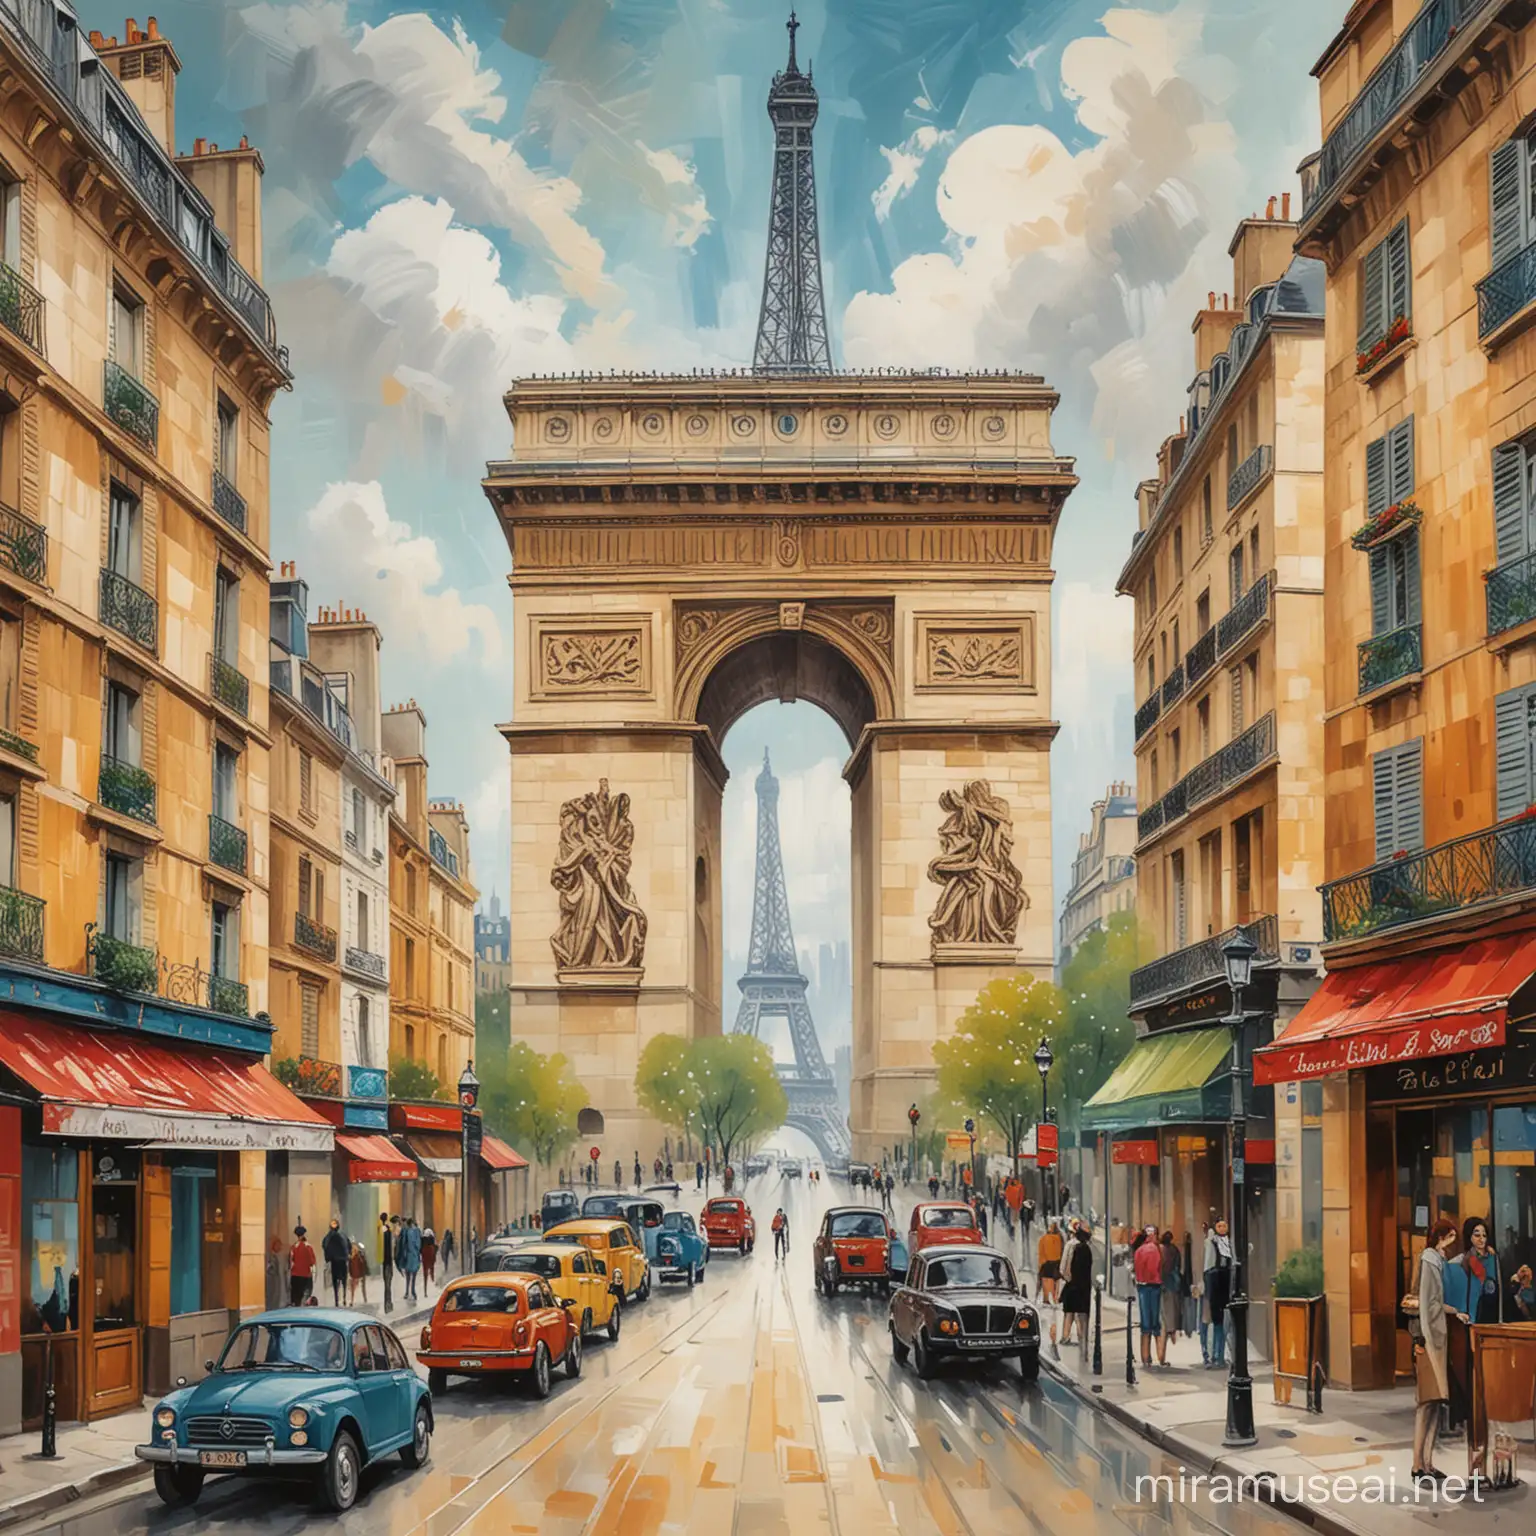 Parisian Landmarks in Picassostyle Painting Eiffel Tower and Arc de Triomphe Artwork